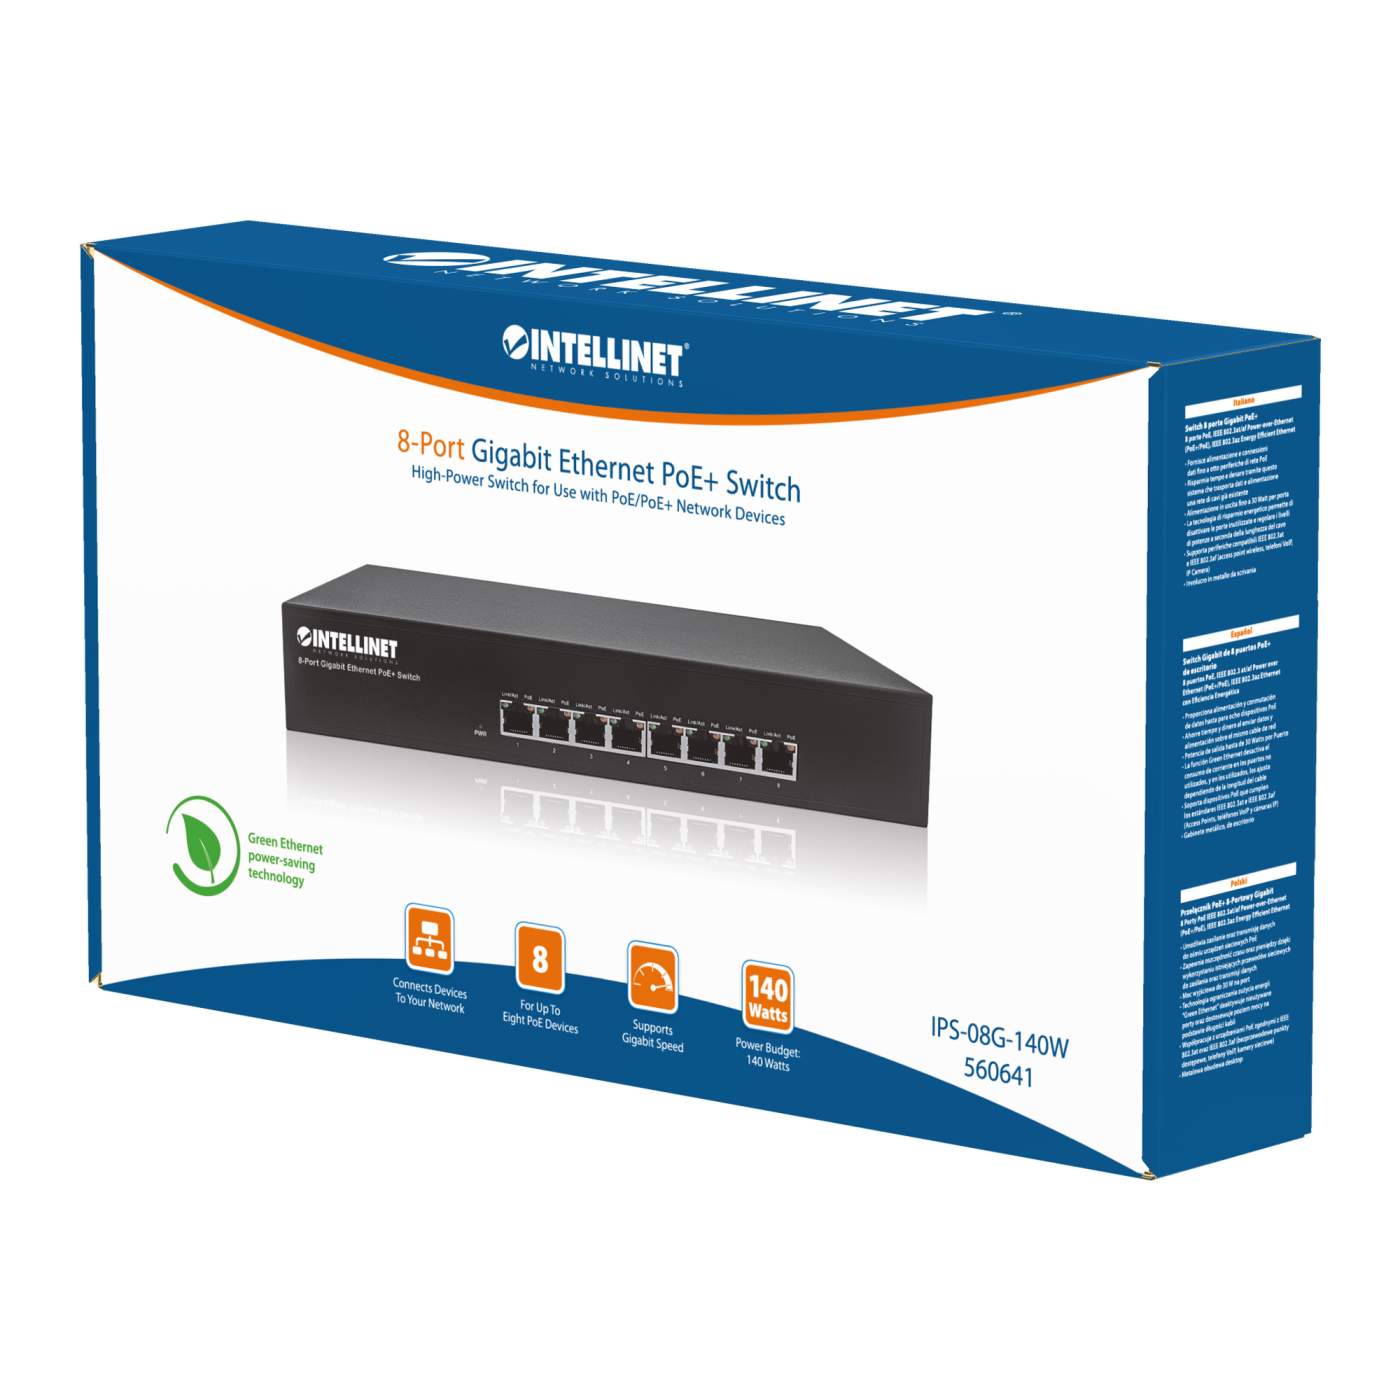 PoE-Powered 8-Port GbE PoE+ Industrial Switch w/ PoE Passthrough –  Intellinet Europe